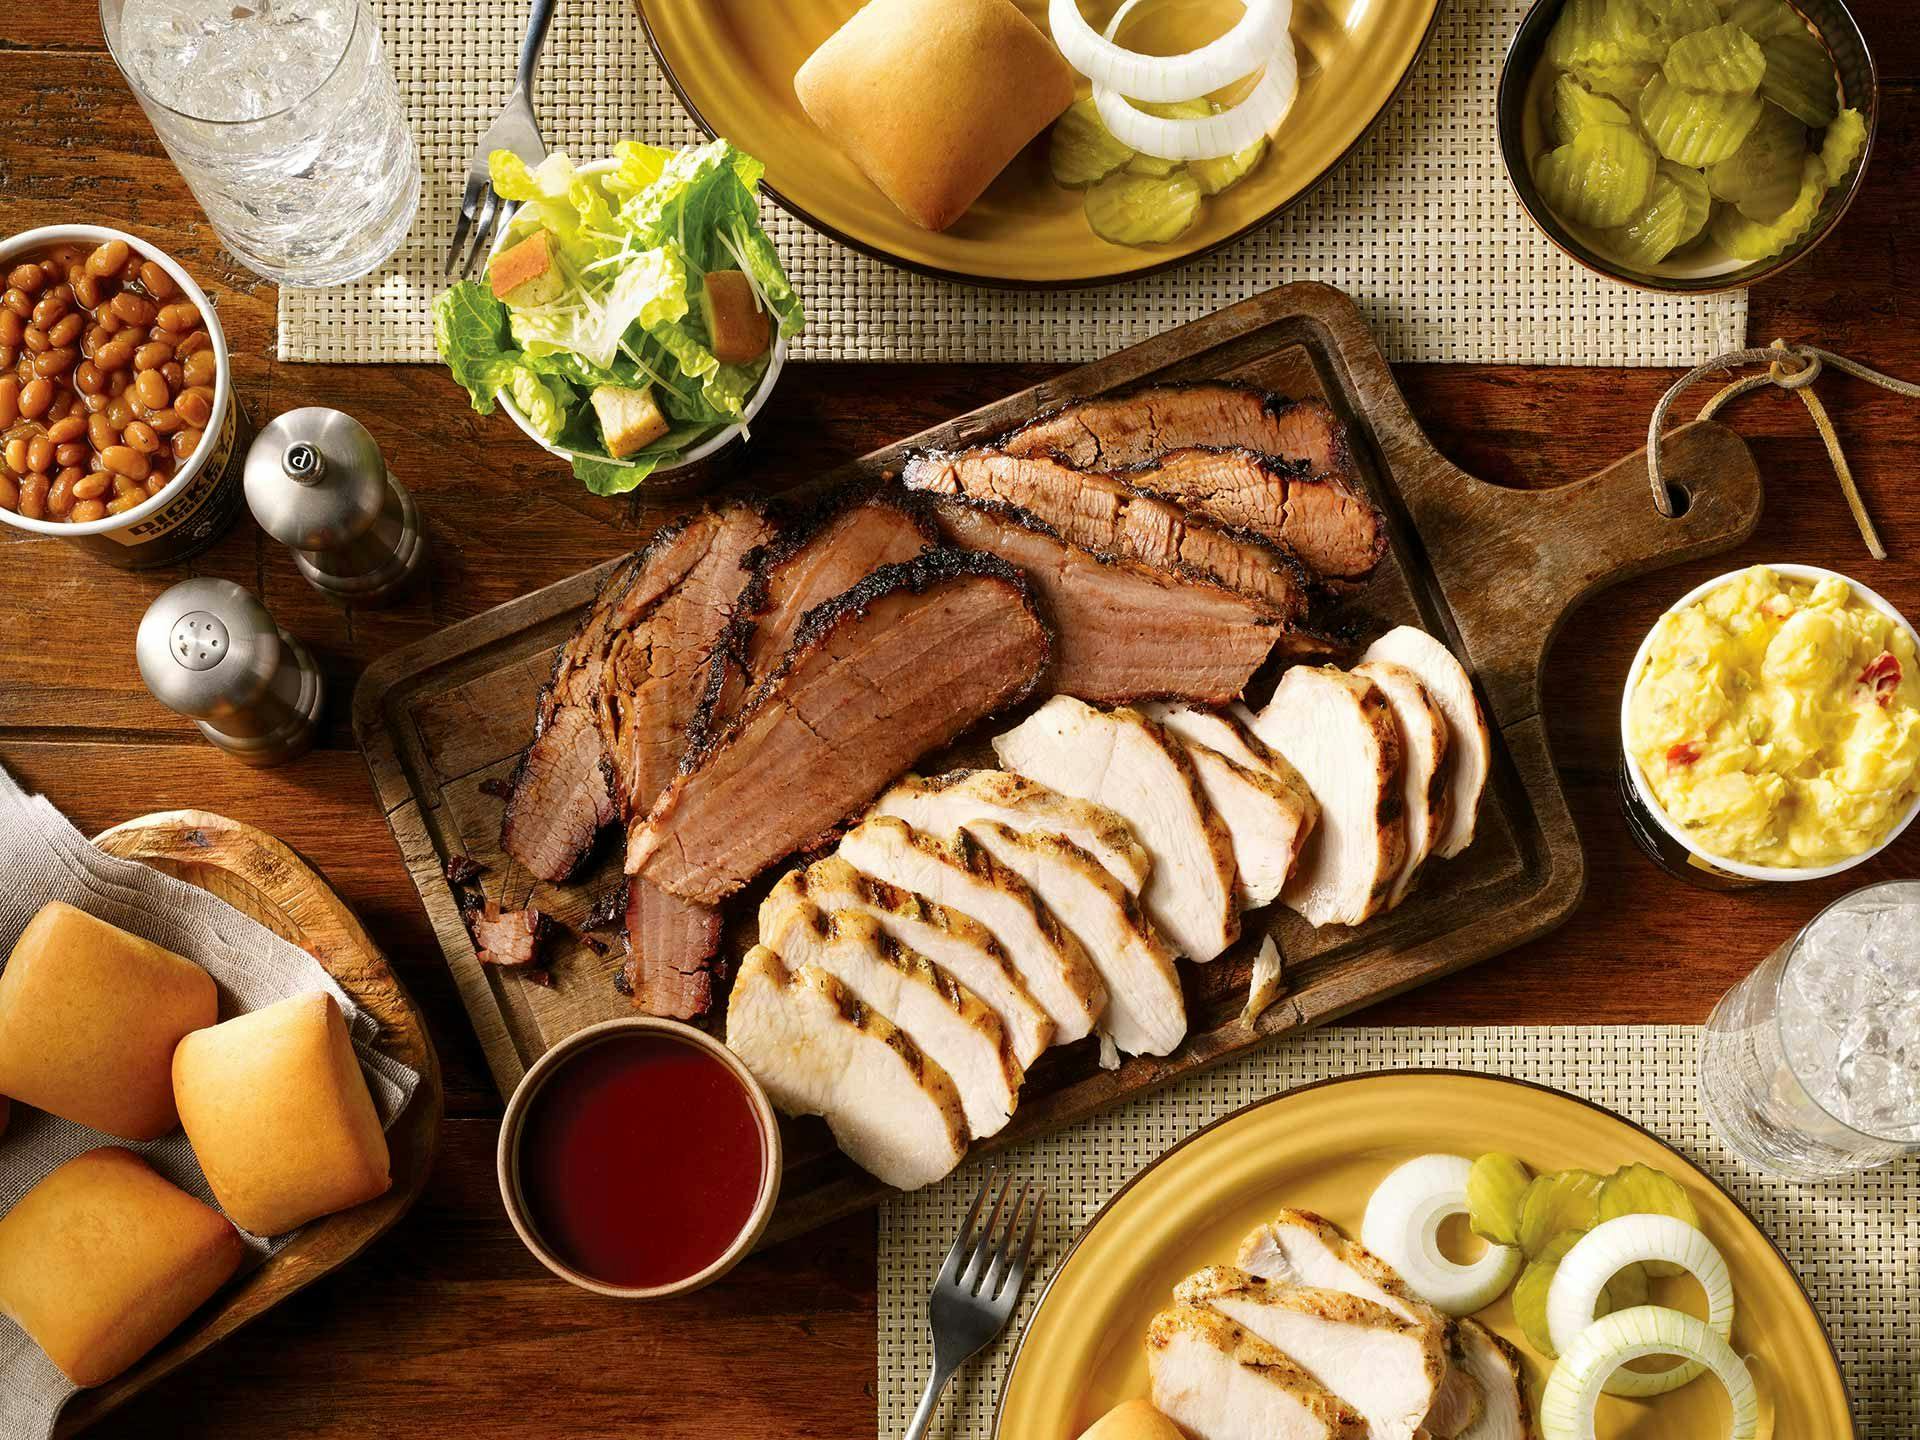 Dickey’s Barbecue Pit Begins Q3 With Dozens of New Development Deals